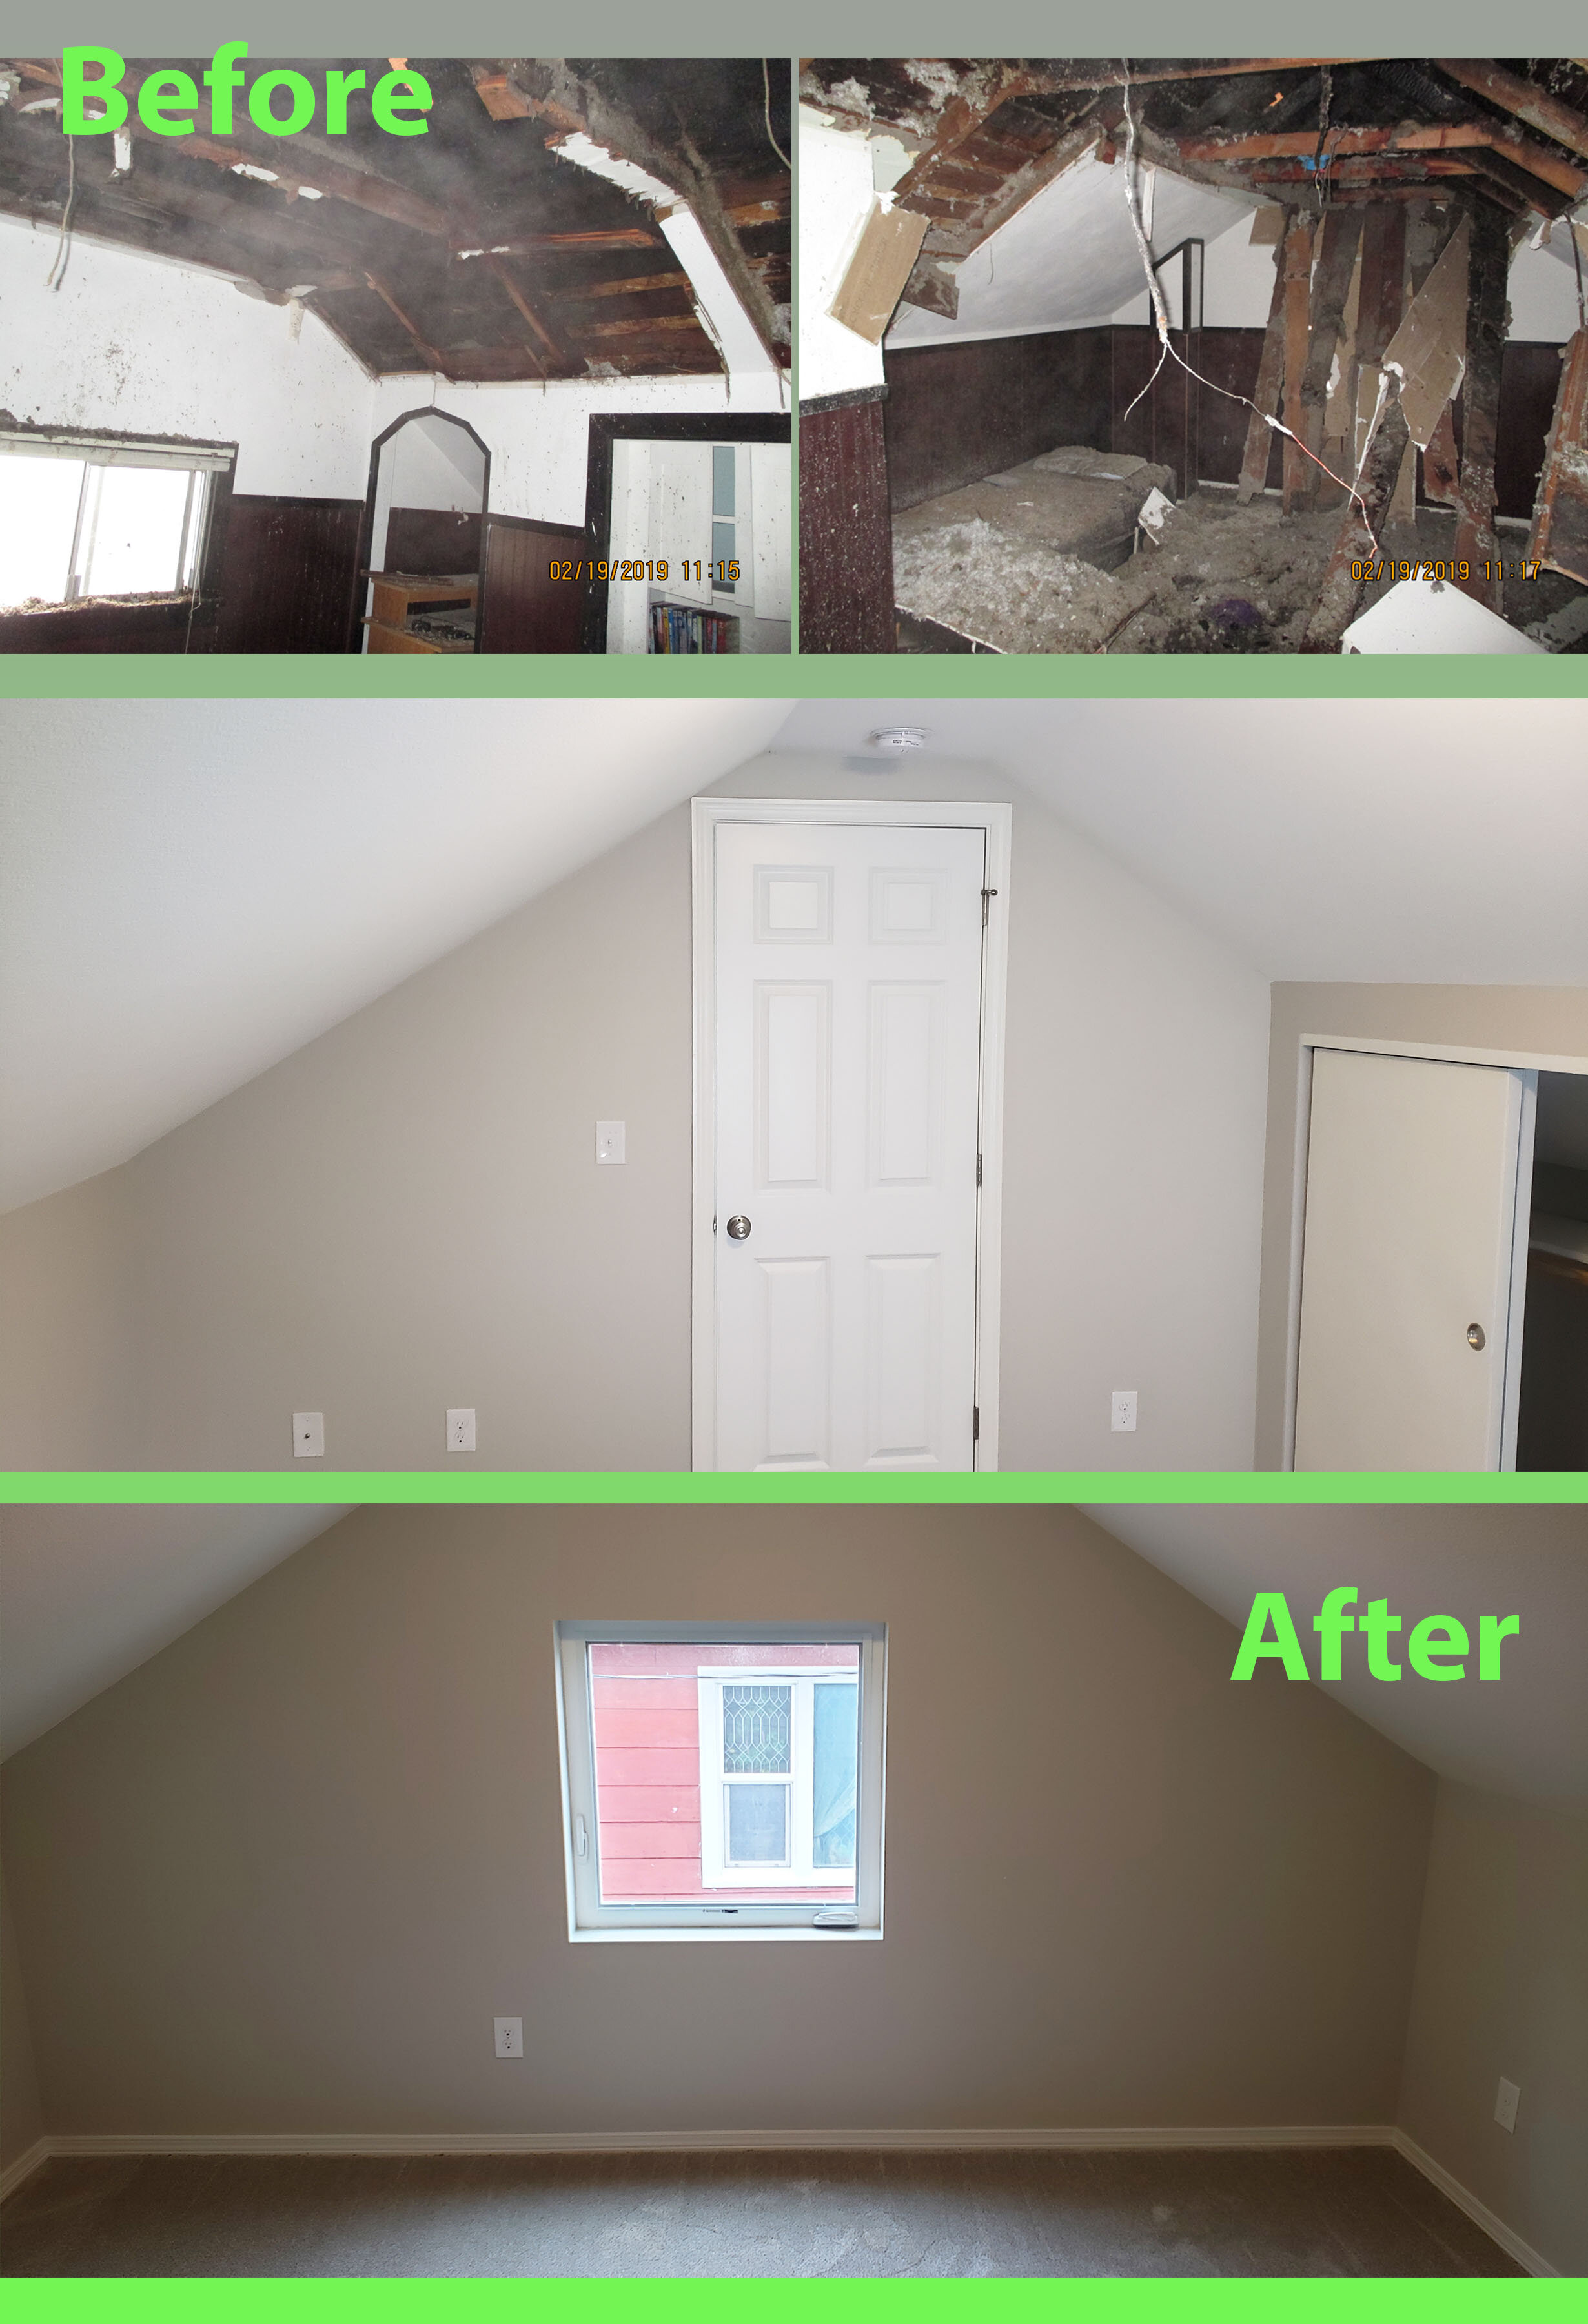 Before After upstairs.jpg